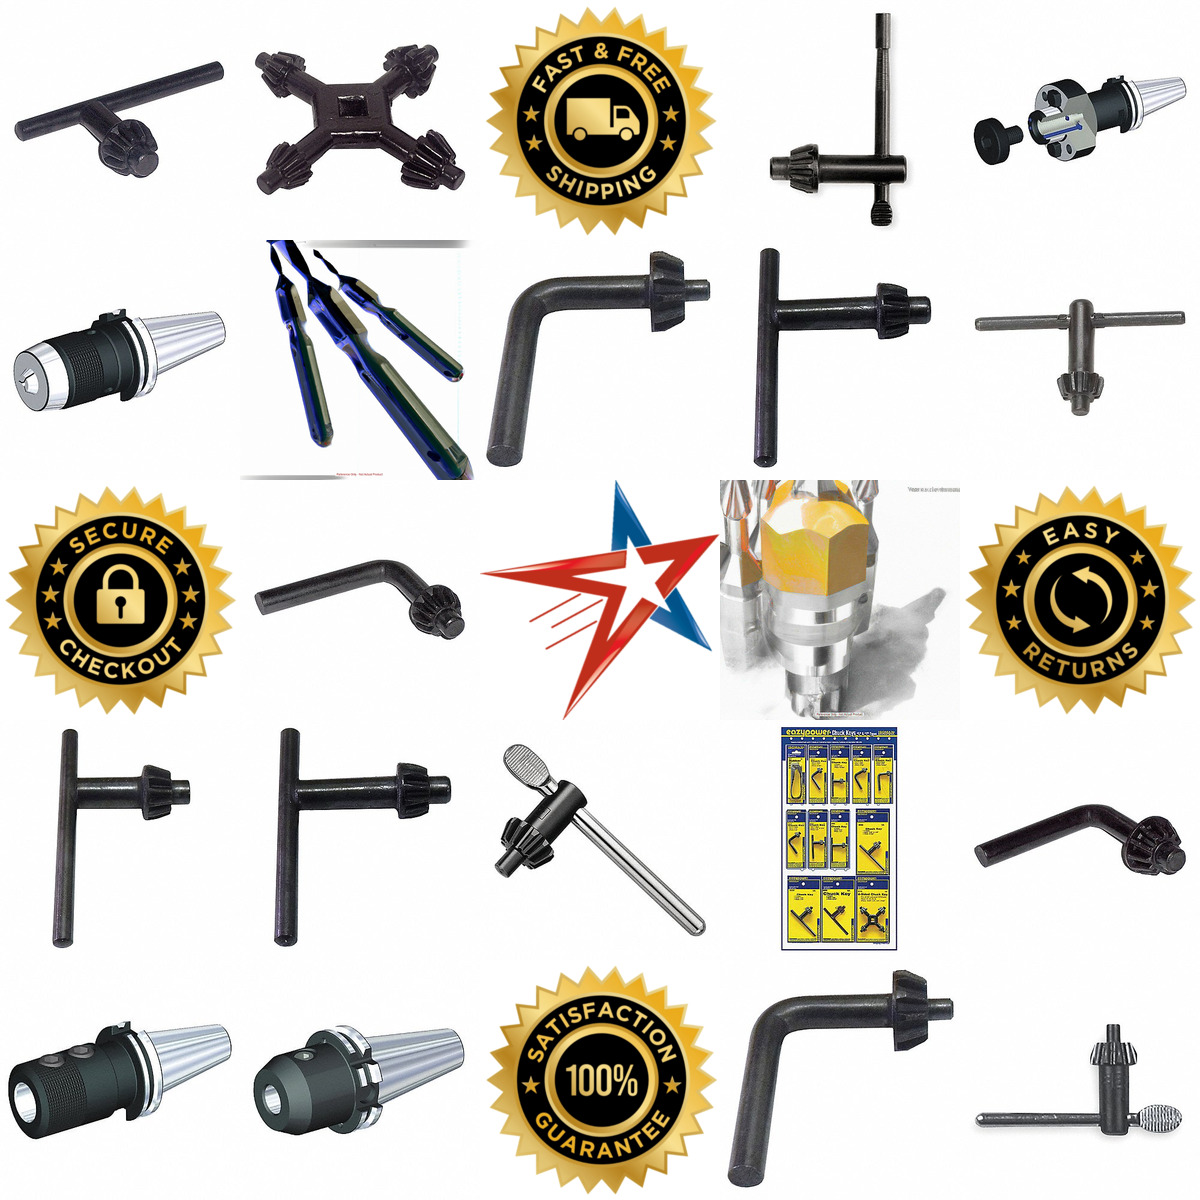 A selection of Drill Chuck Keys products on GoVets